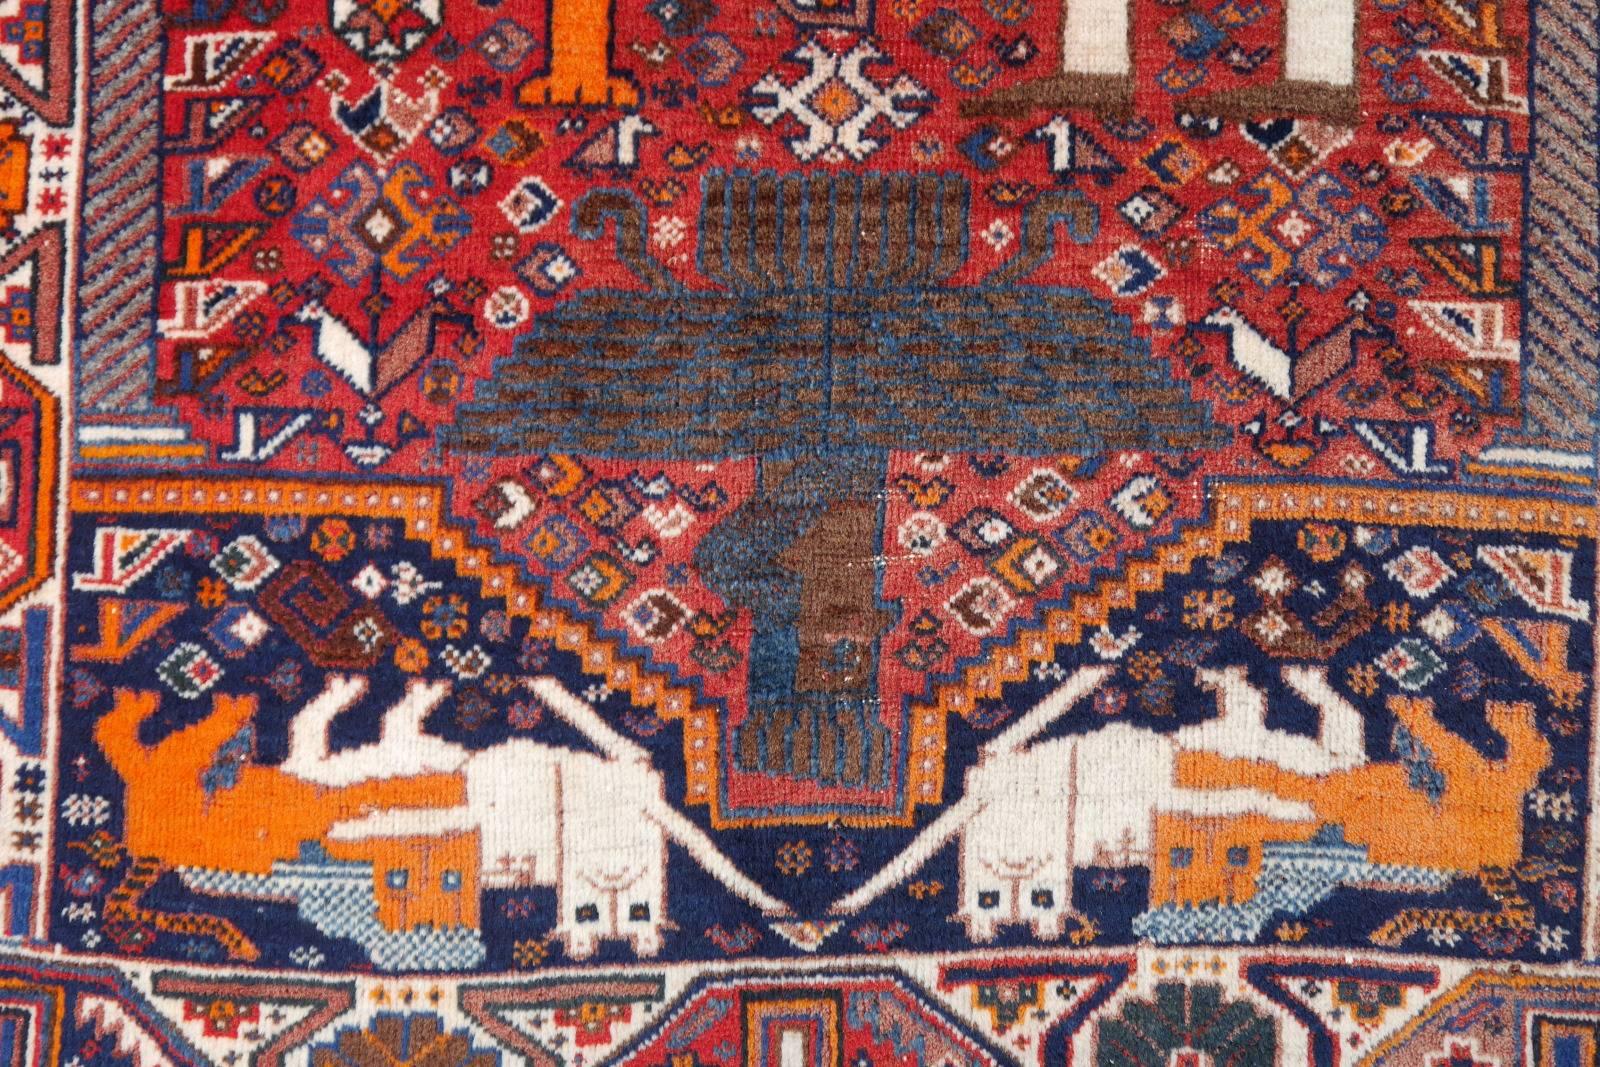 This is a tribal Qashqai rug, hand-knotted by women of the tribal people south east of the Persian city of Shiraz. It was made in the 1960s using hand spun Persian highland sheep wool from the Zagros mountains. 

The Motiv shows a King fighting a